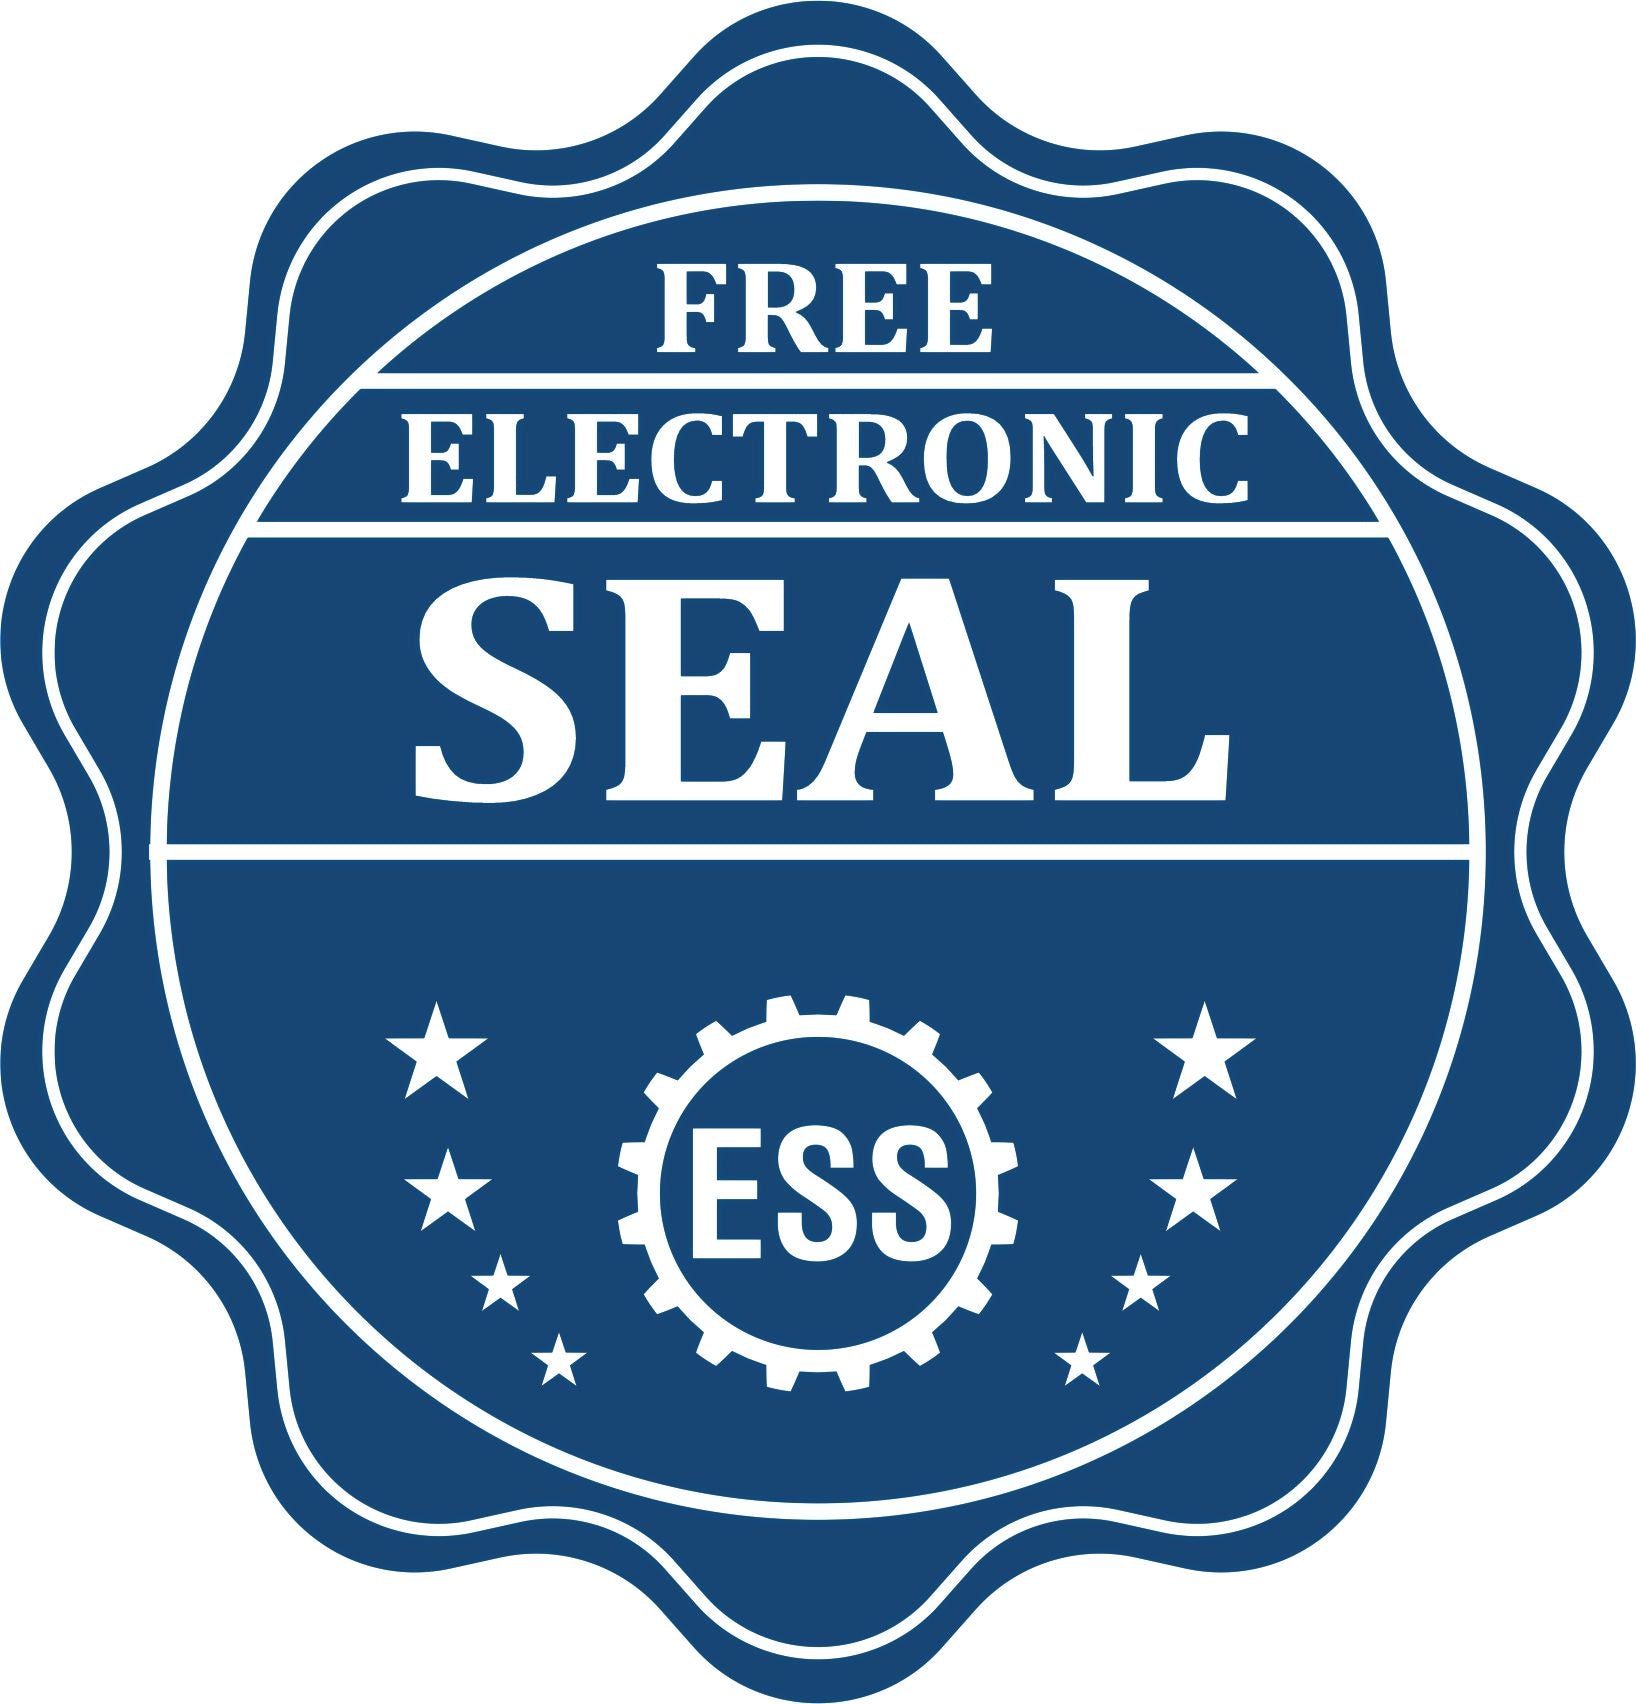 A badge showing a free electronic seal for the Soft Minnesota Professional Engineer Seal with stars and the ESS gear on the emblem.